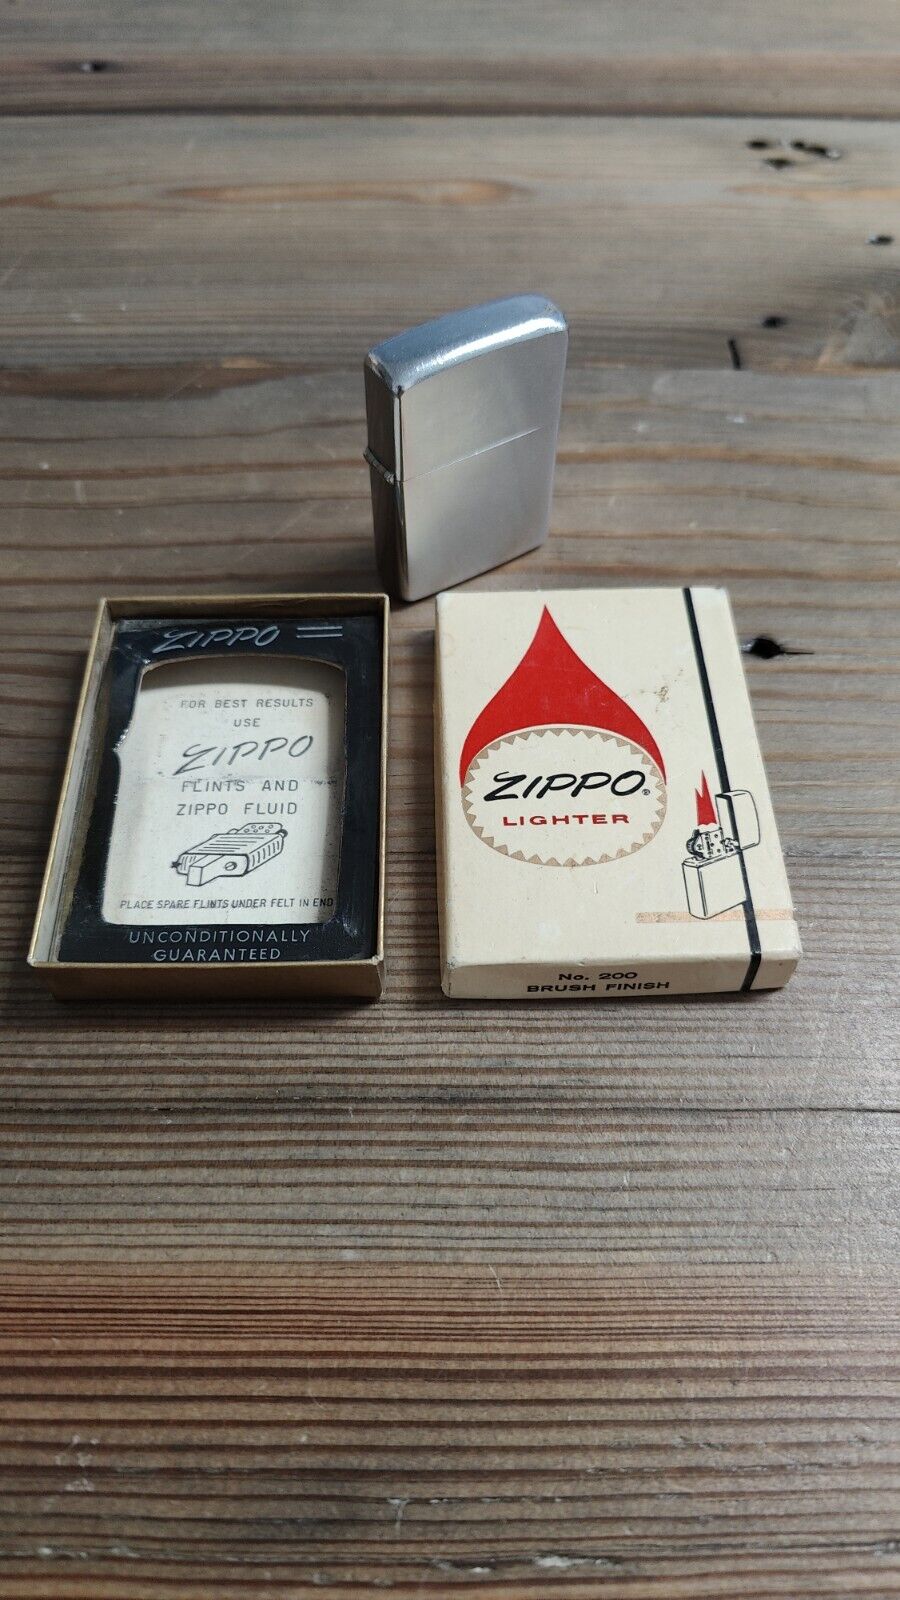 1968 Stainless Steel Zippo Lighter With 1960's Zippo Box